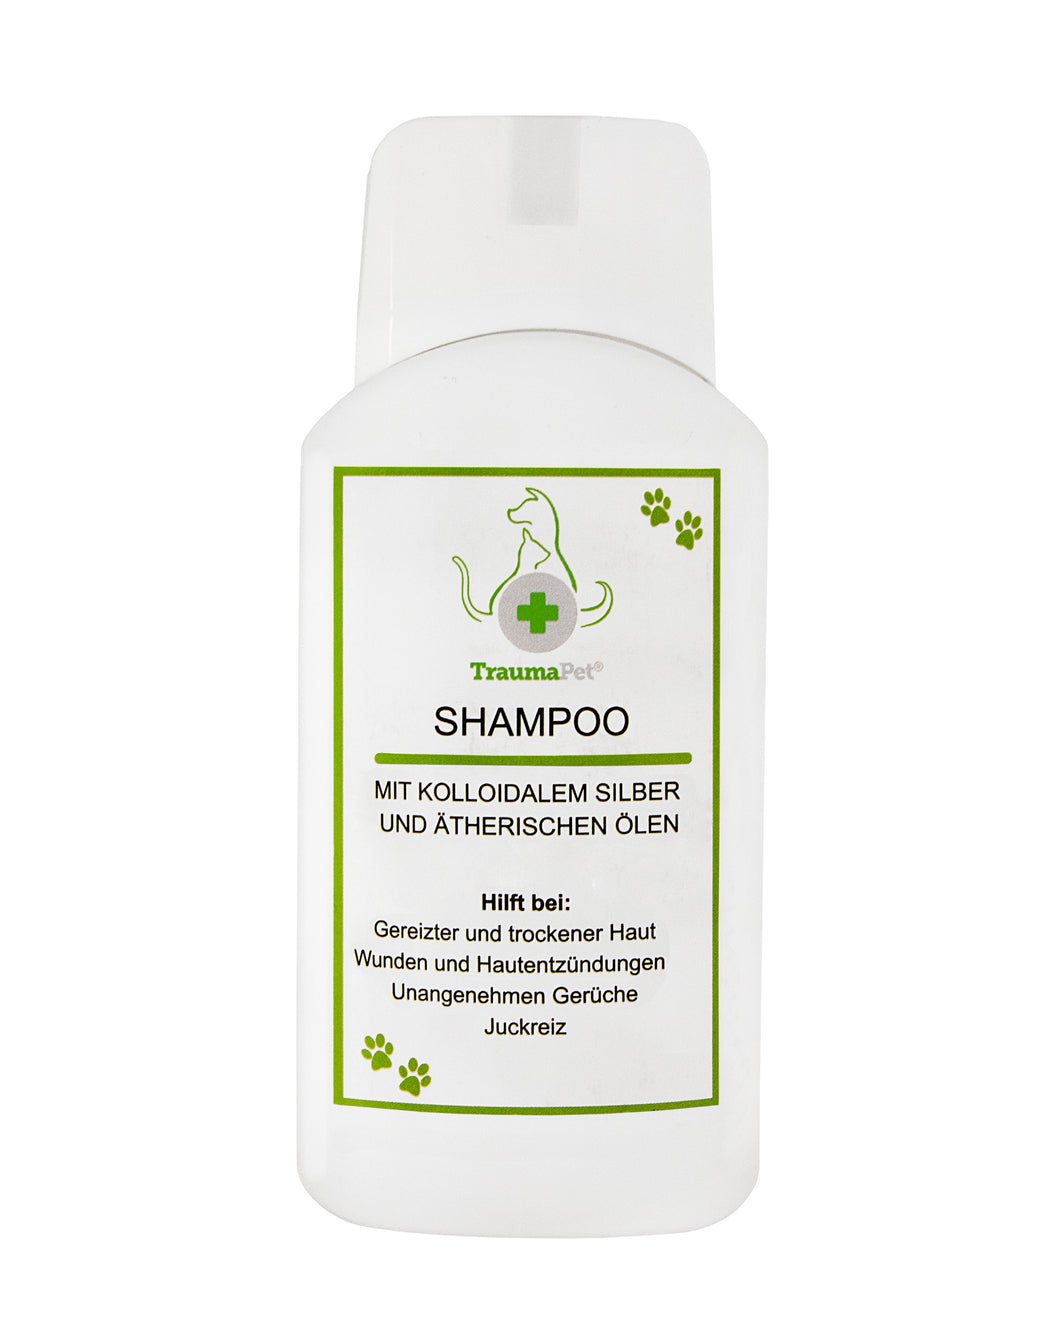 Shampoo for dogs and cats with colloidal silver and essential oils